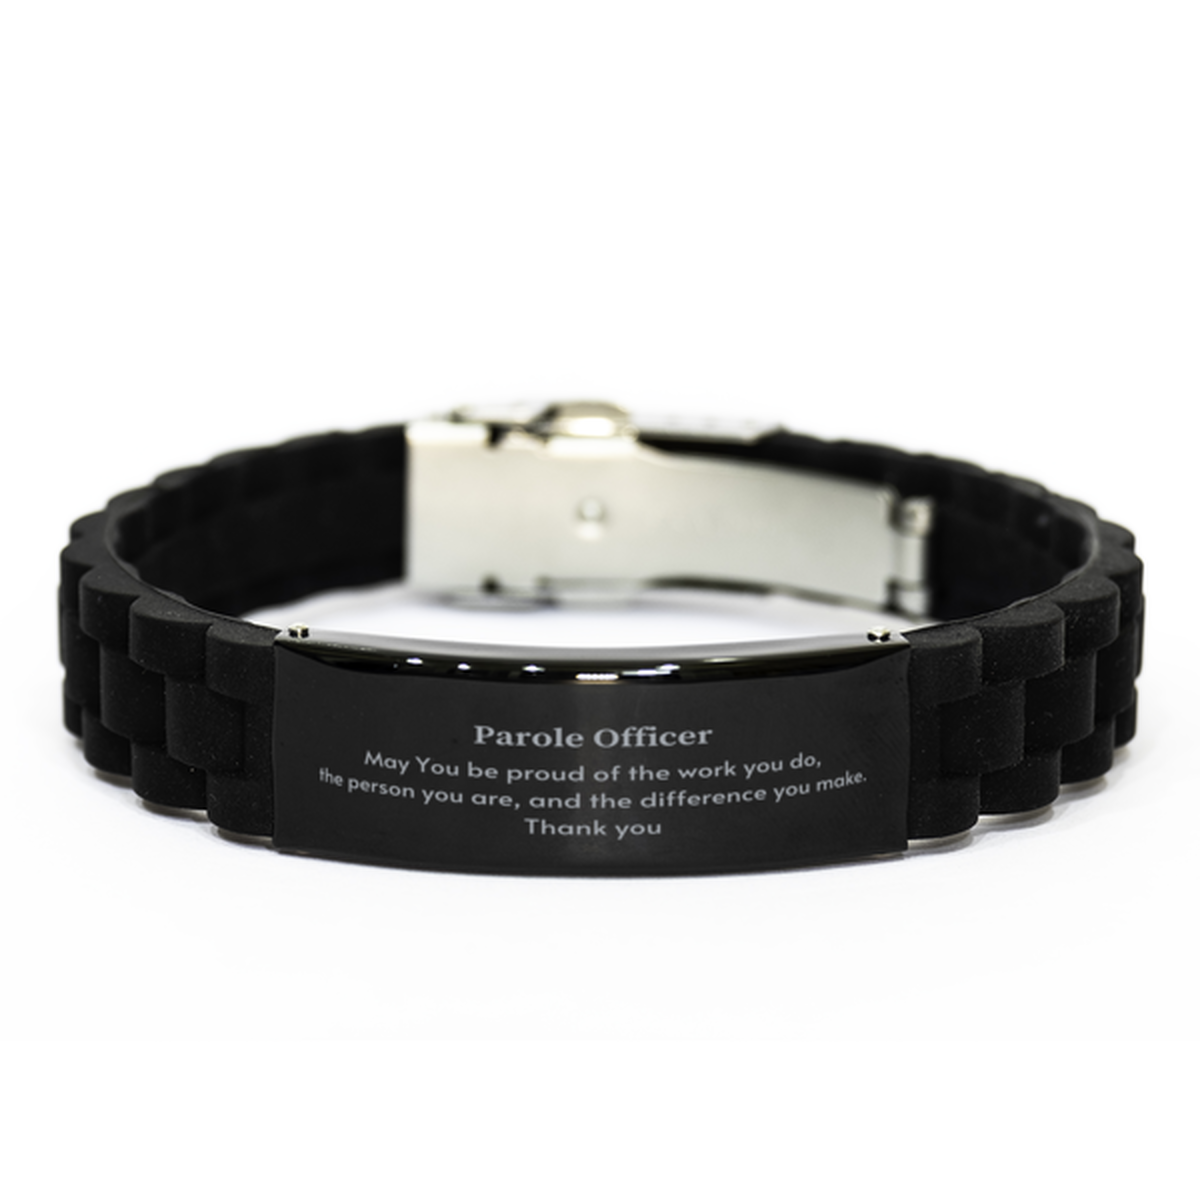 Heartwarming Black Glidelock Clasp Bracelet Retirement Coworkers Gifts for Parole Officer, Parole Officer May You be proud of the work you do, the person you are Gifts for Boss Men Women Friends